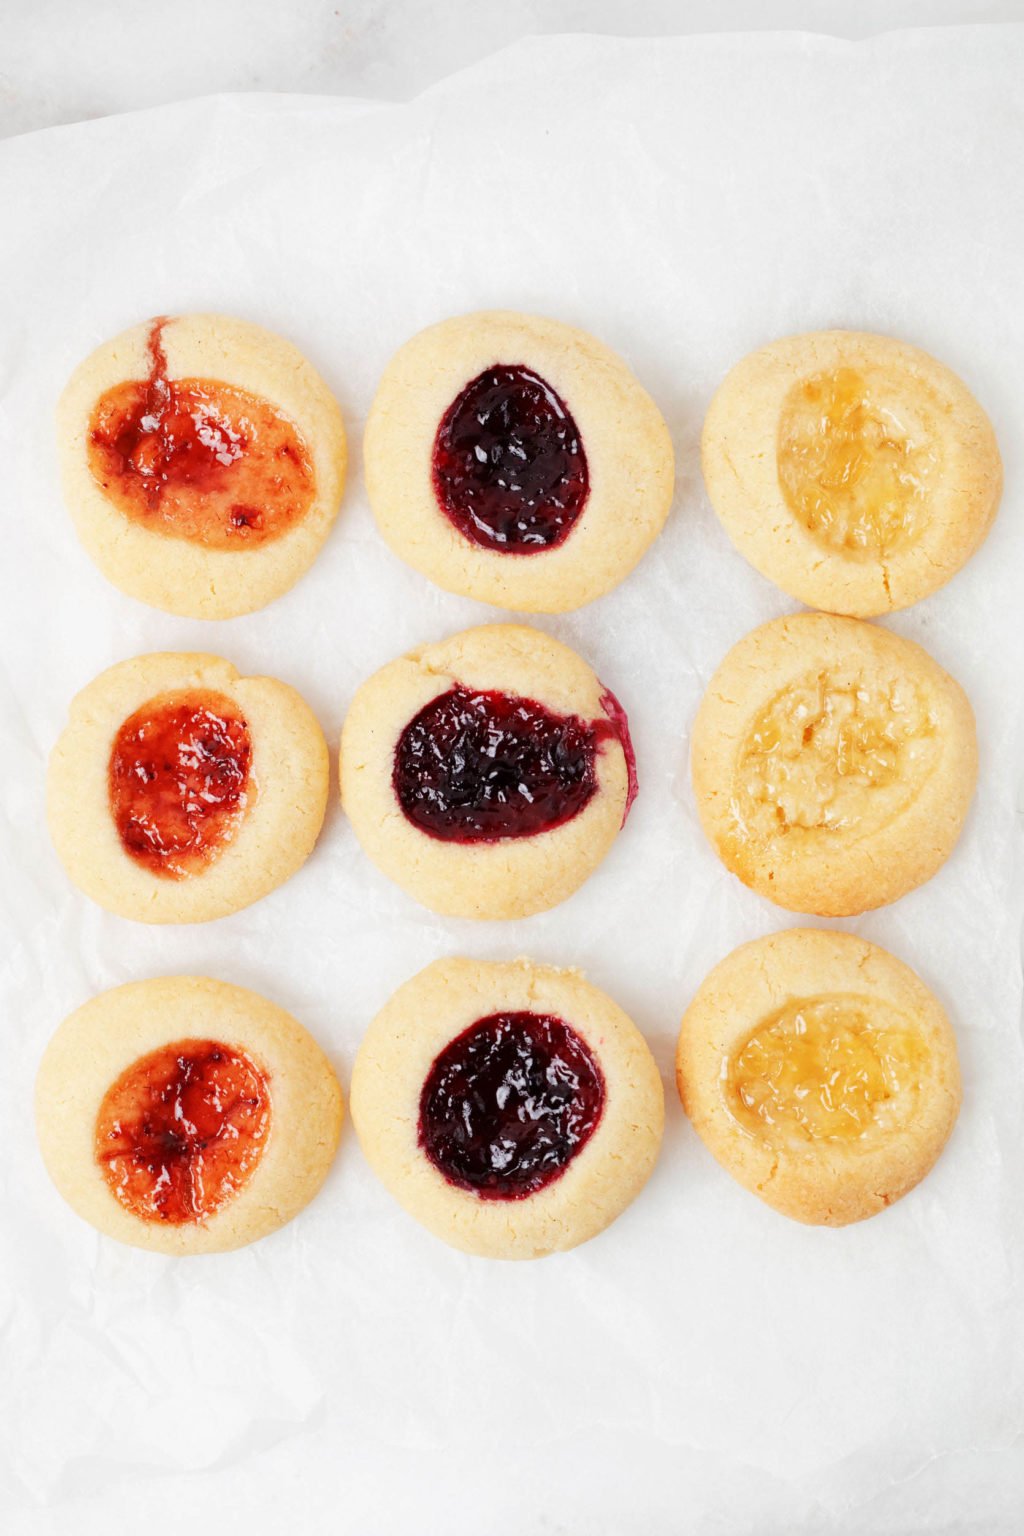 Three rows of thumbprint cookies, each filled with a different colored jam, are resting on a parchment lined baking sheet.